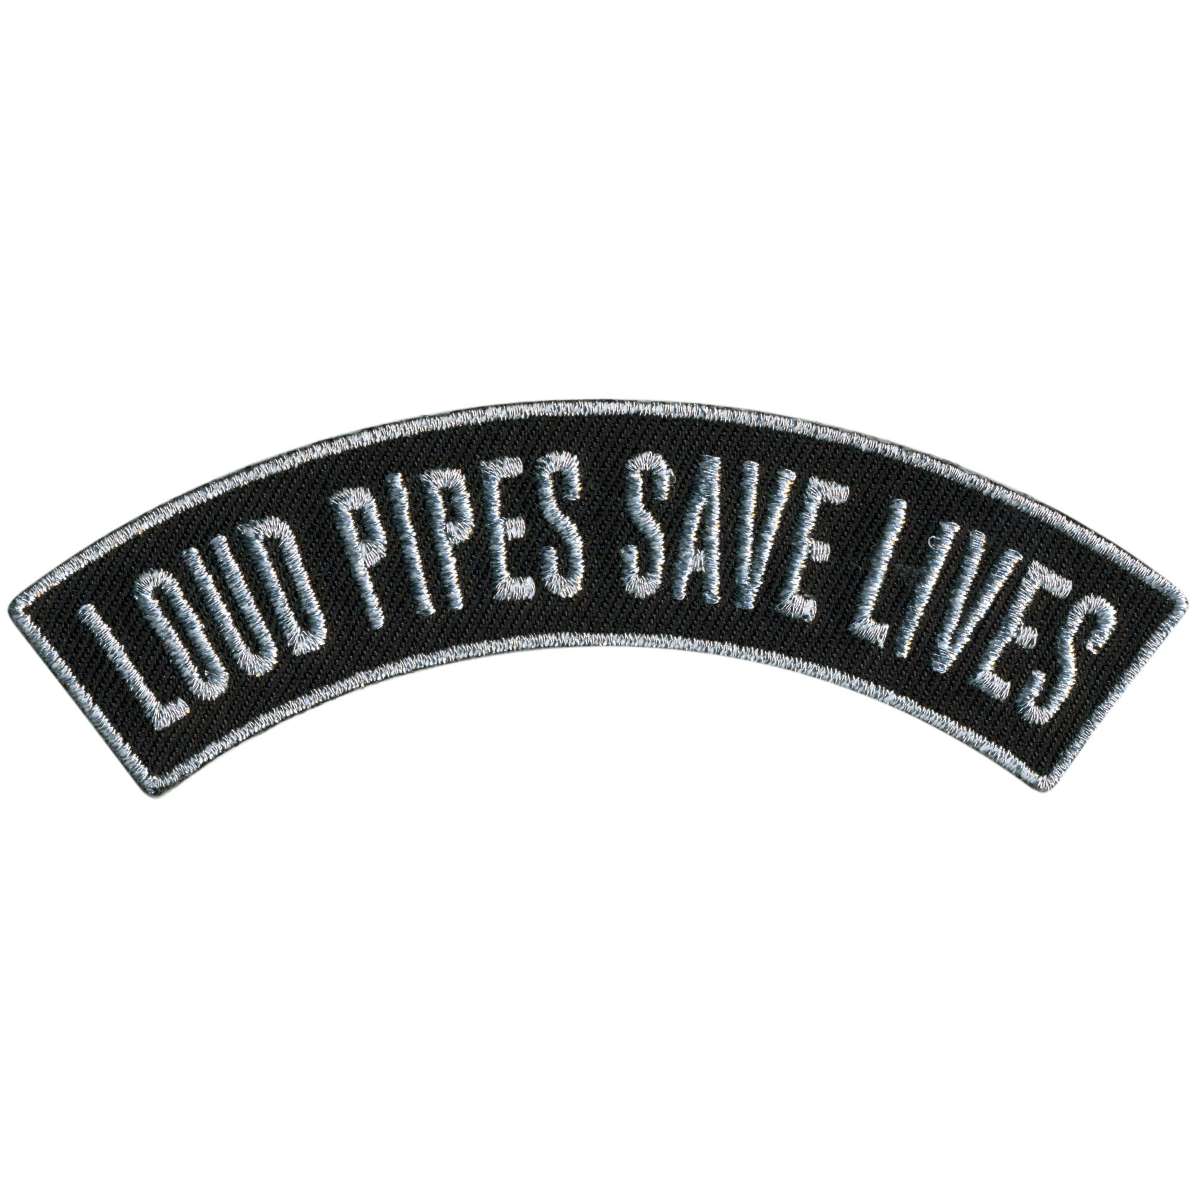 Hot Leathers Loud Pipes Save Lives 4” X 1” Top Rocker Patch PPM4200